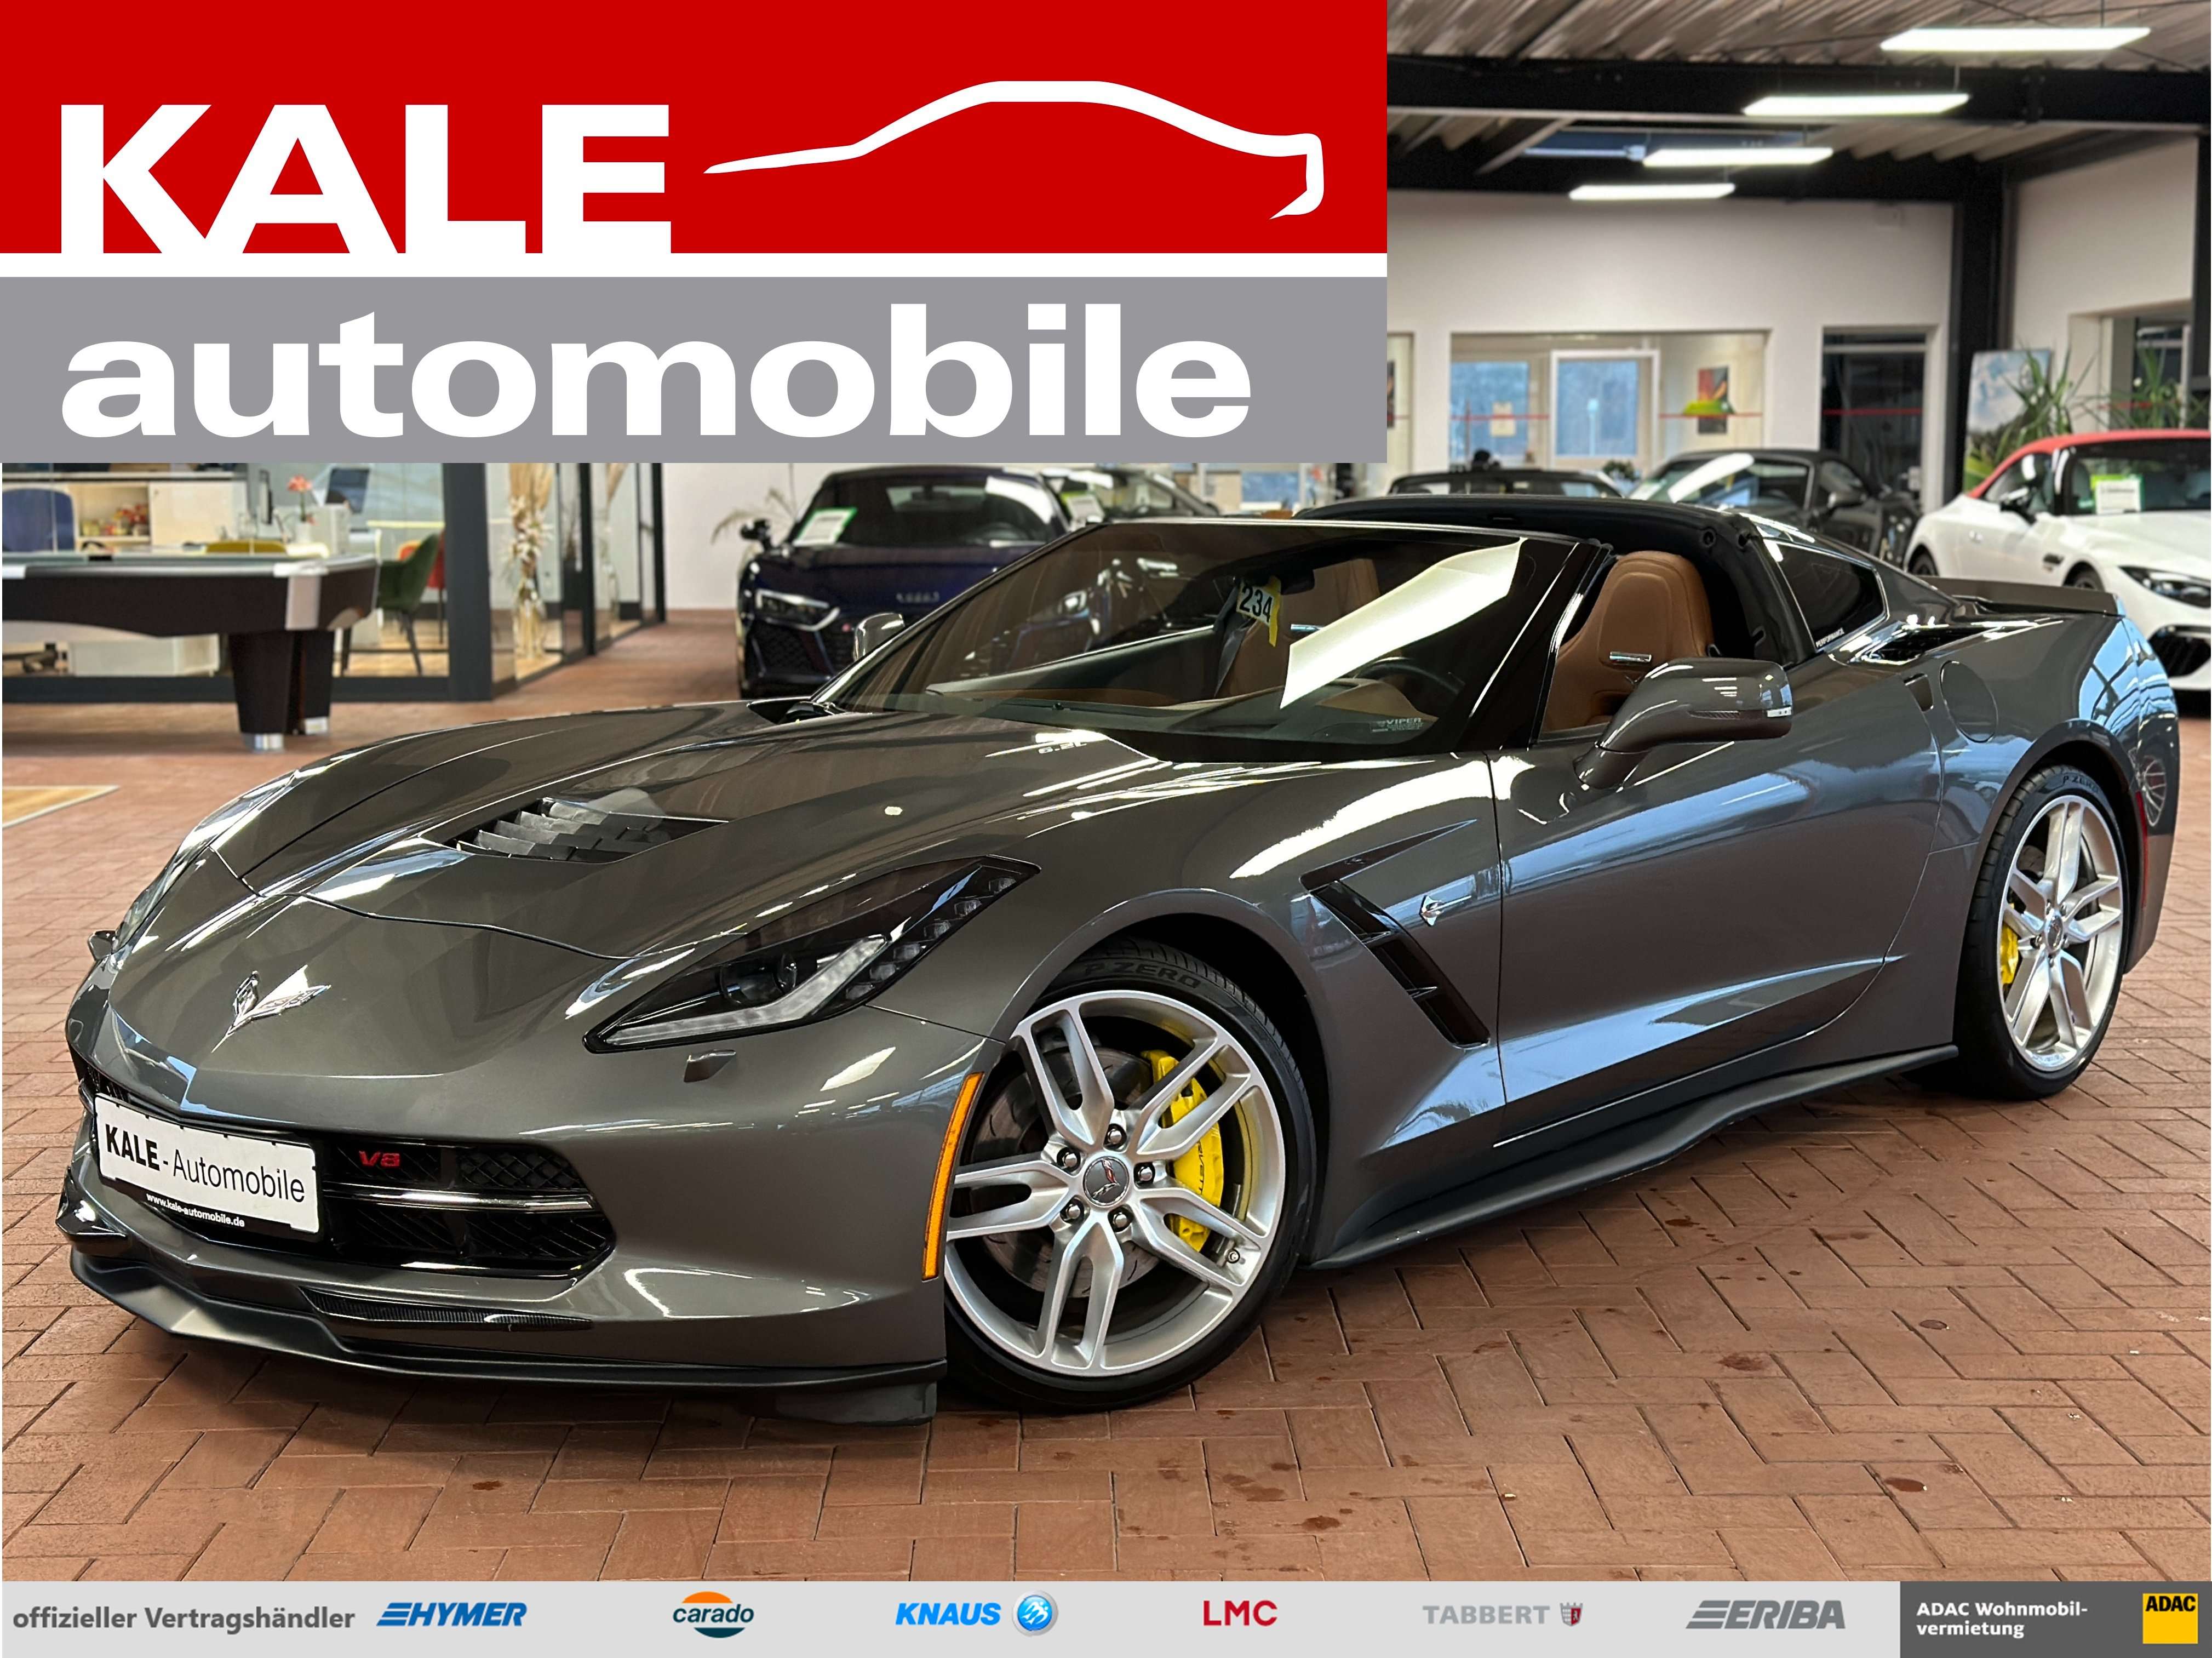 Corvette C7 Coupe in Grey used in Helmstedt for € 55,970.-